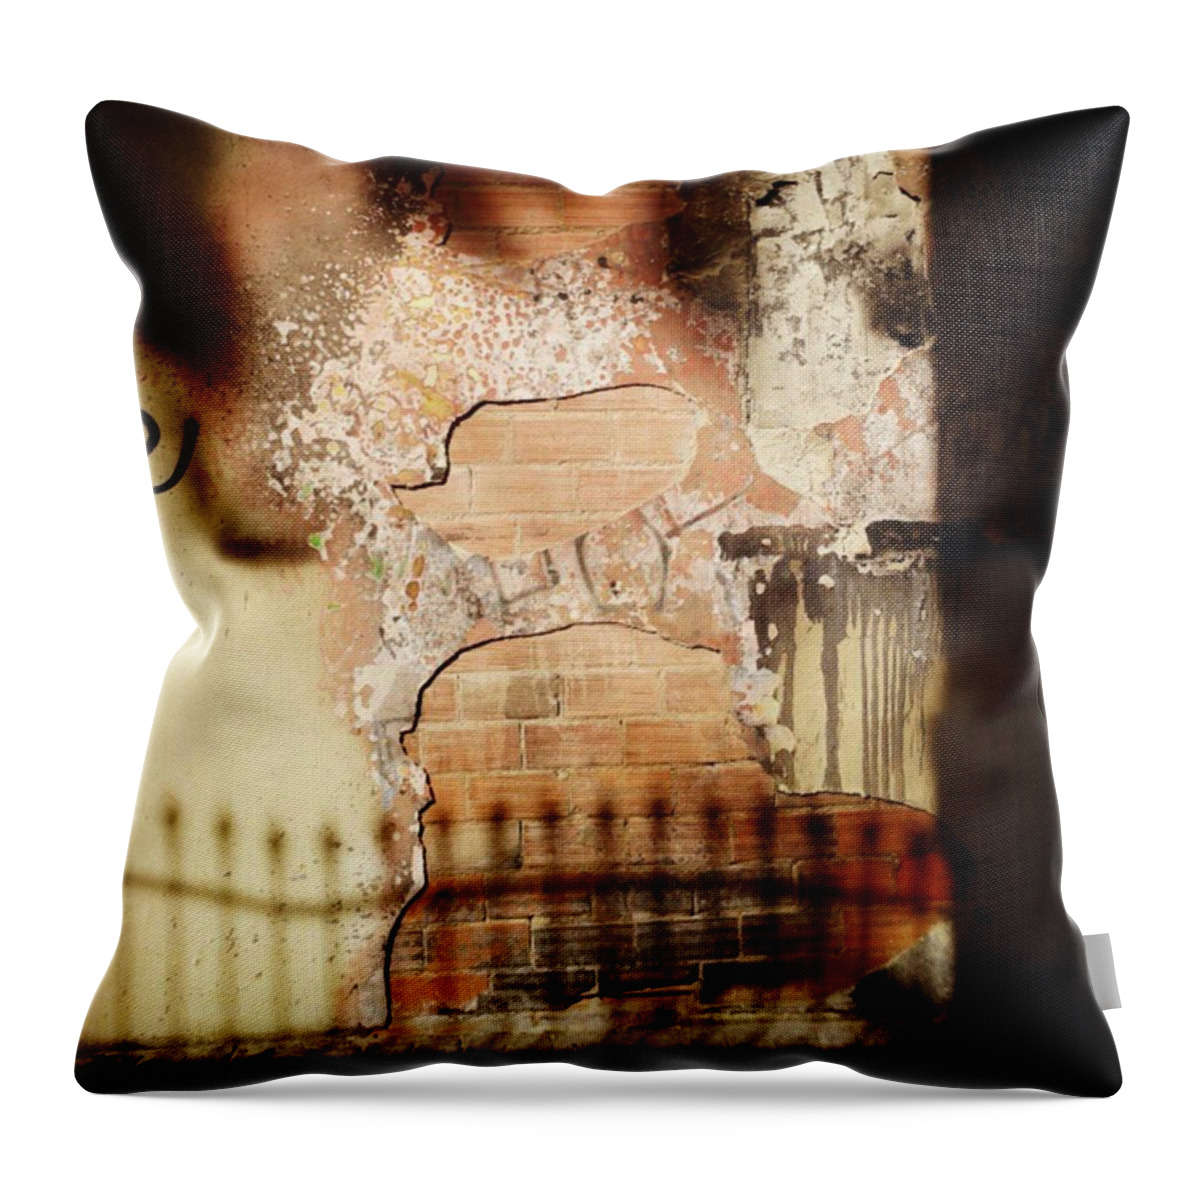  Throw Pillow featuring the photograph Line Of Fire by Tim Freeman